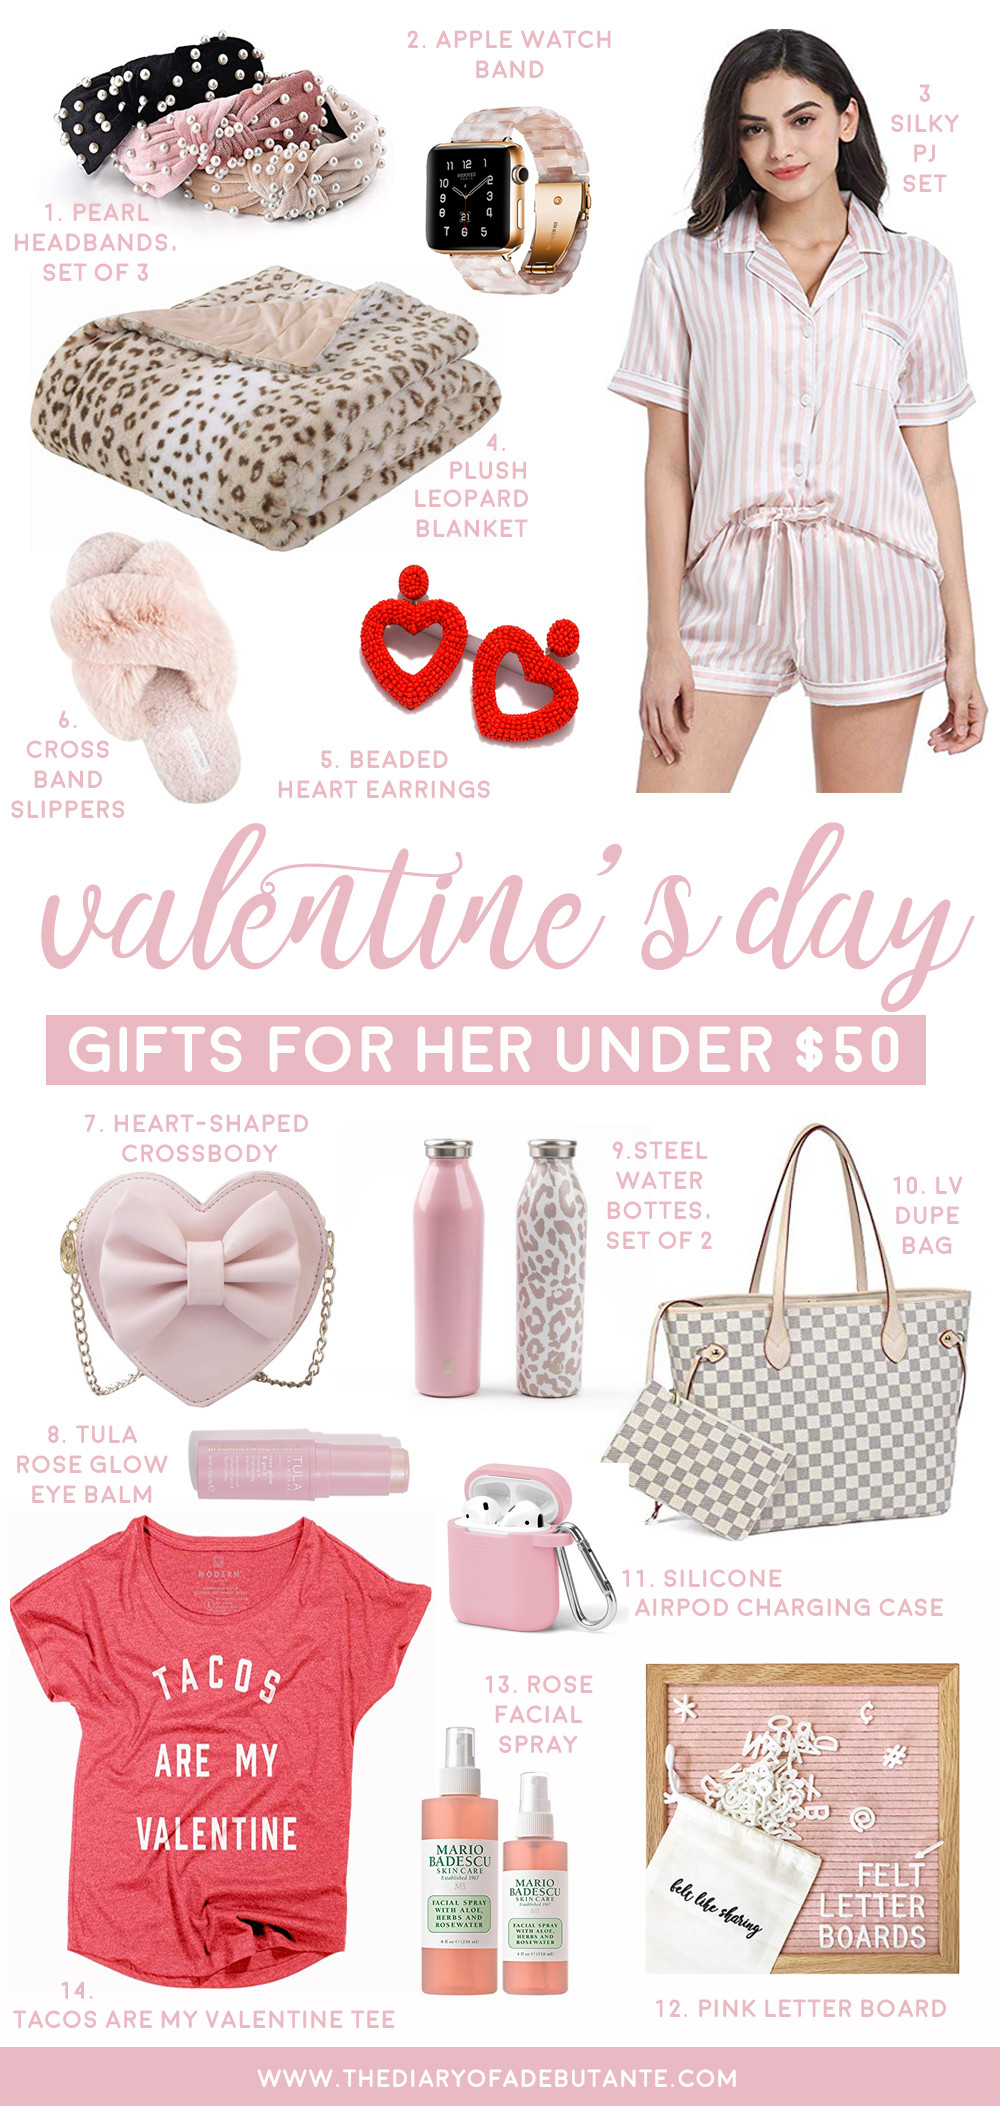 Valentines Gift Ideas For Wife
 Valentine s Day Gift Ideas for Your Girlfriend or Wife